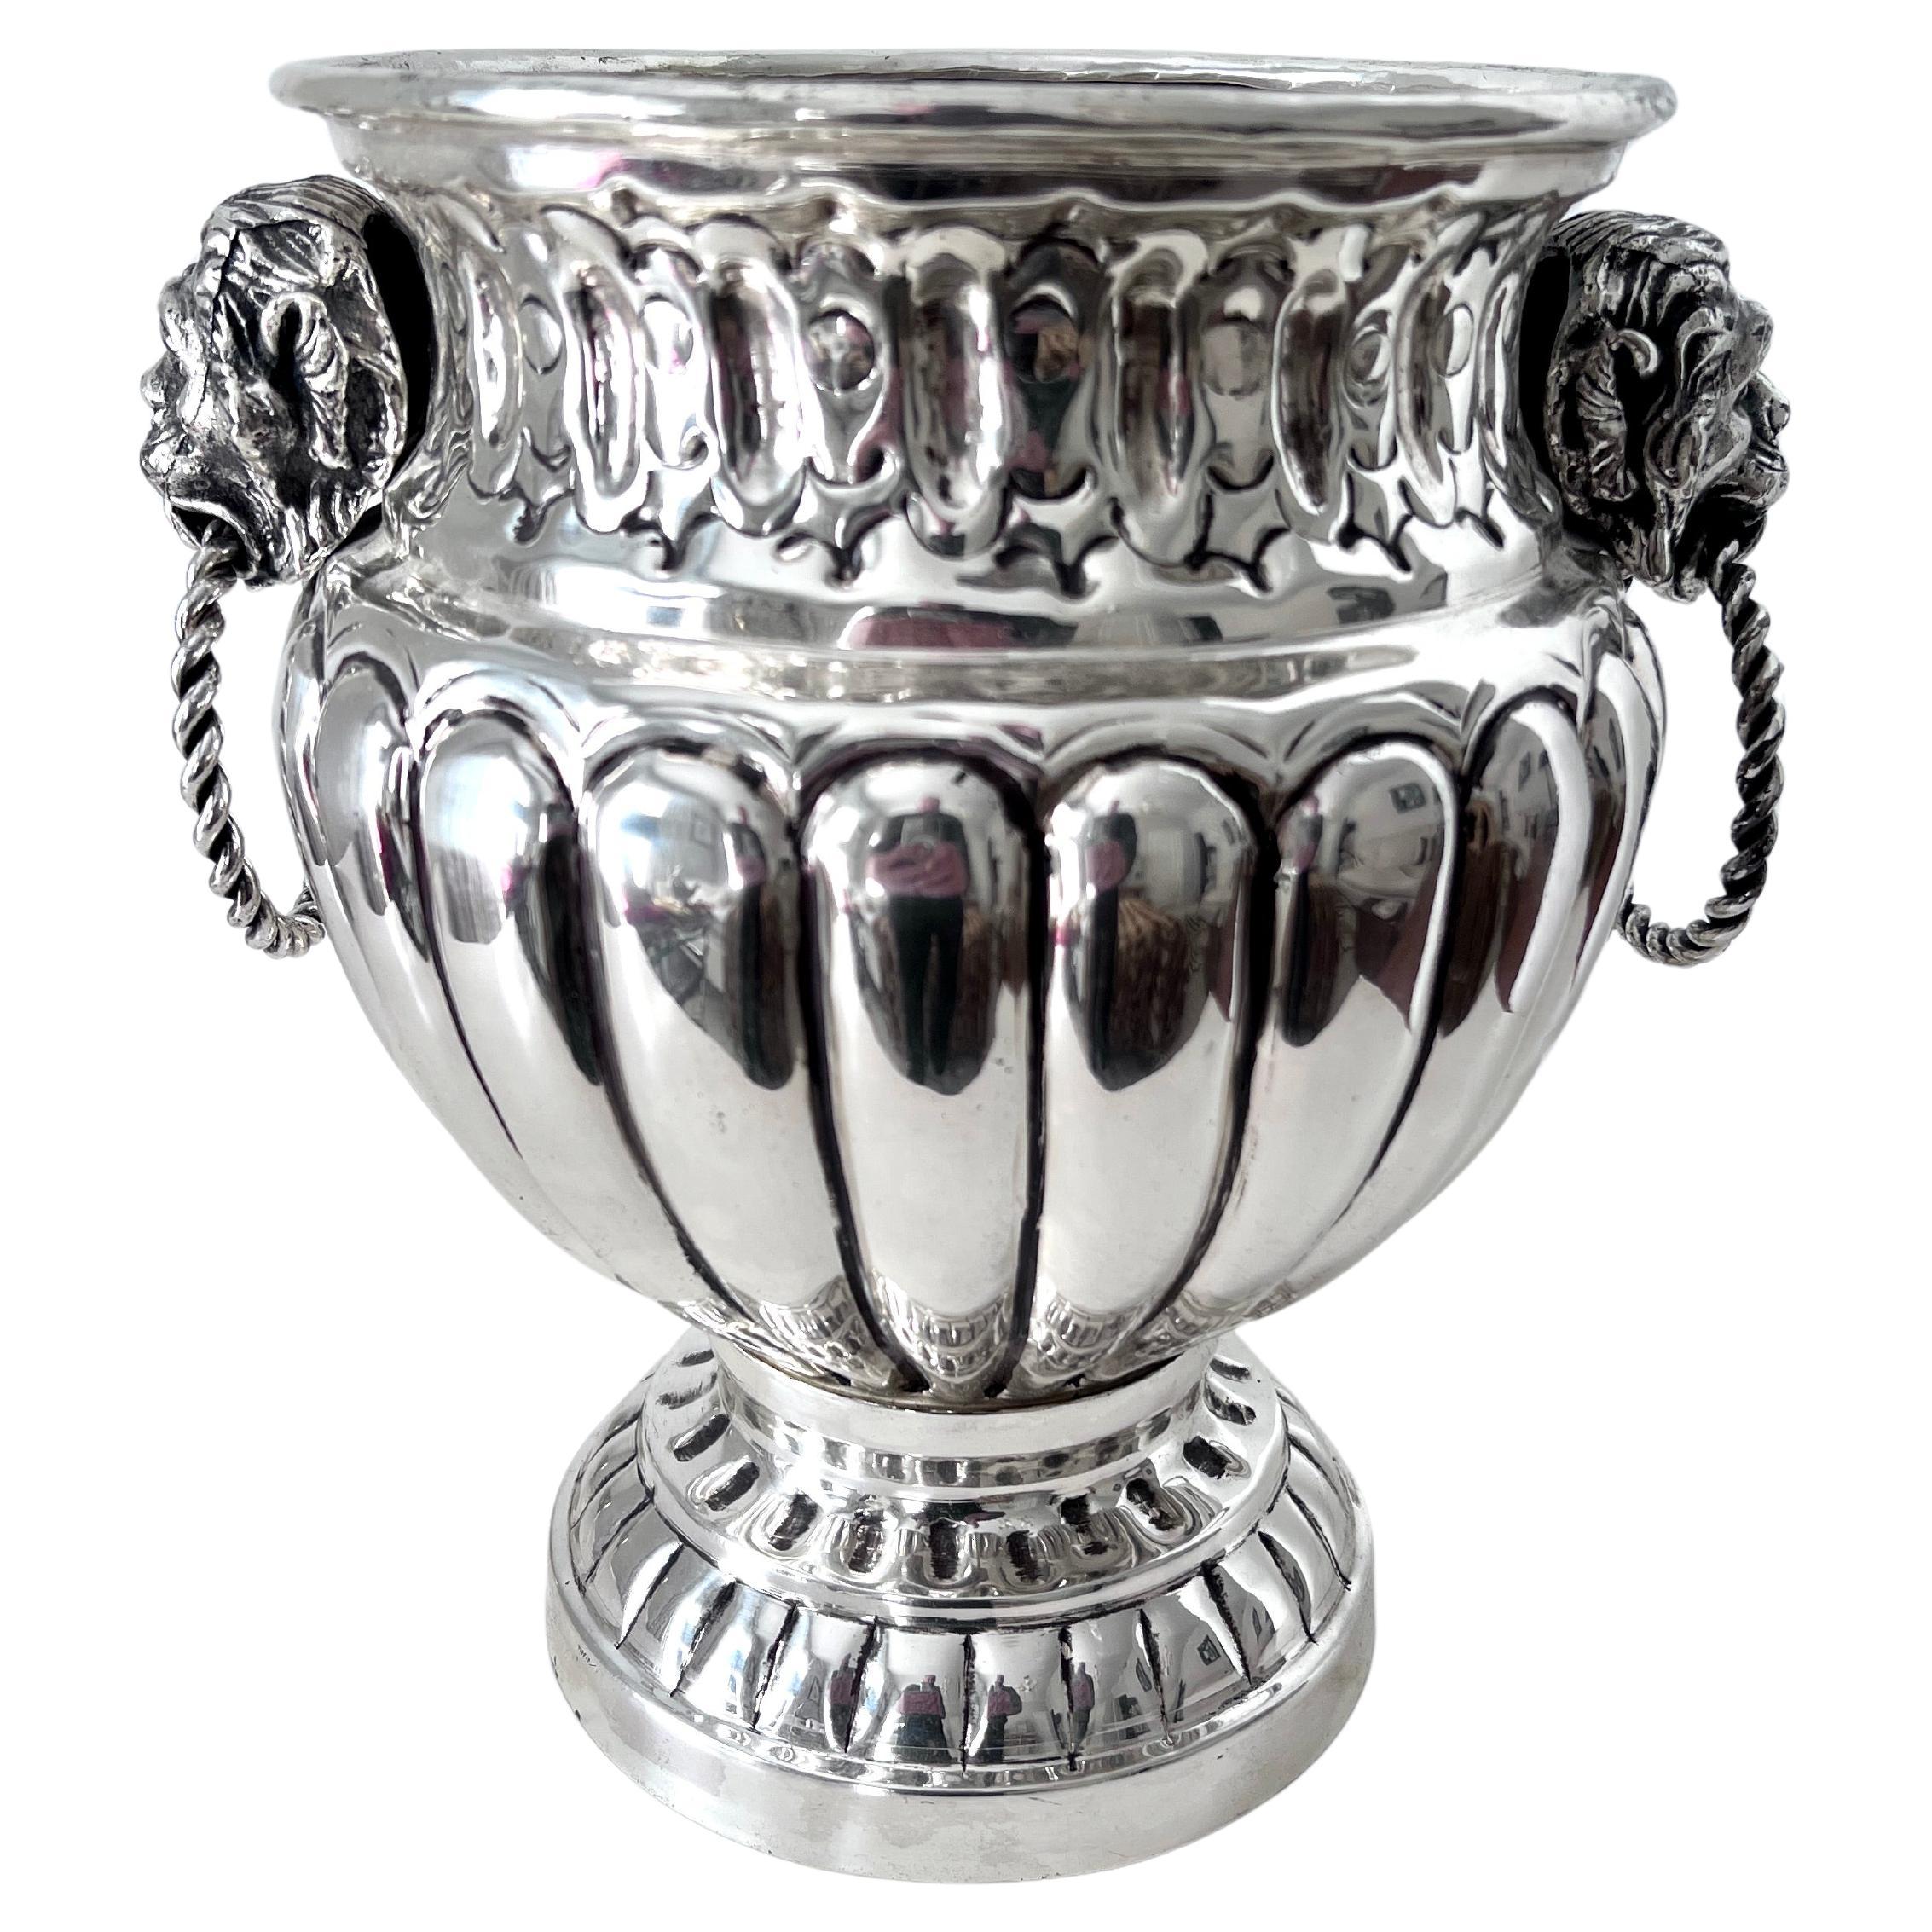 19th C .Dutch Silver Plate Ribbed Repoussé Champagne Ice Bucket with Lion Handle